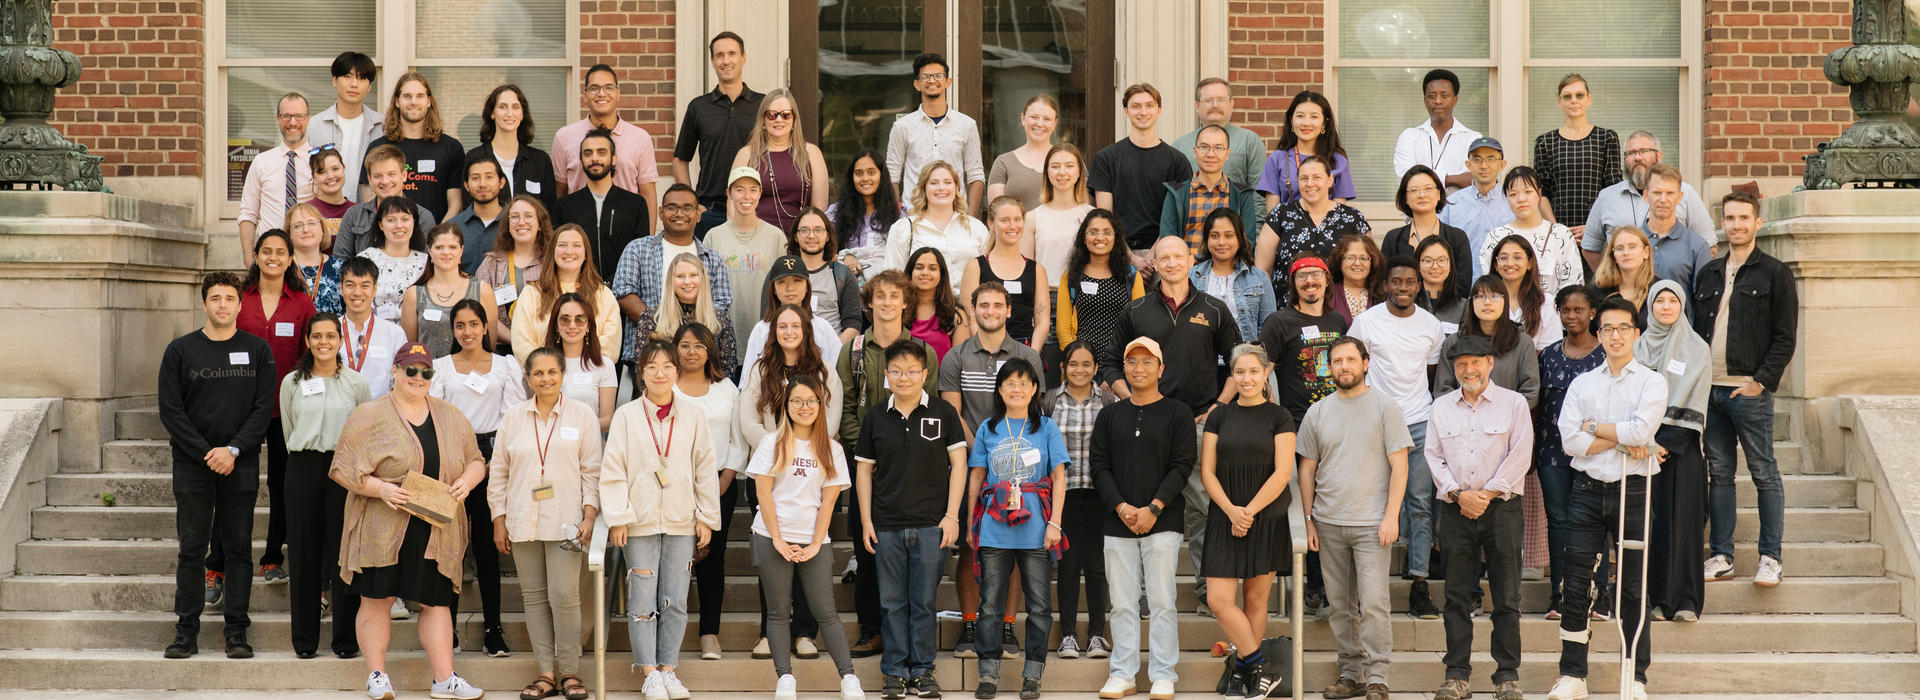 Group photo of faculty, students, and staff standing on outdoor steps to Jackson Hall